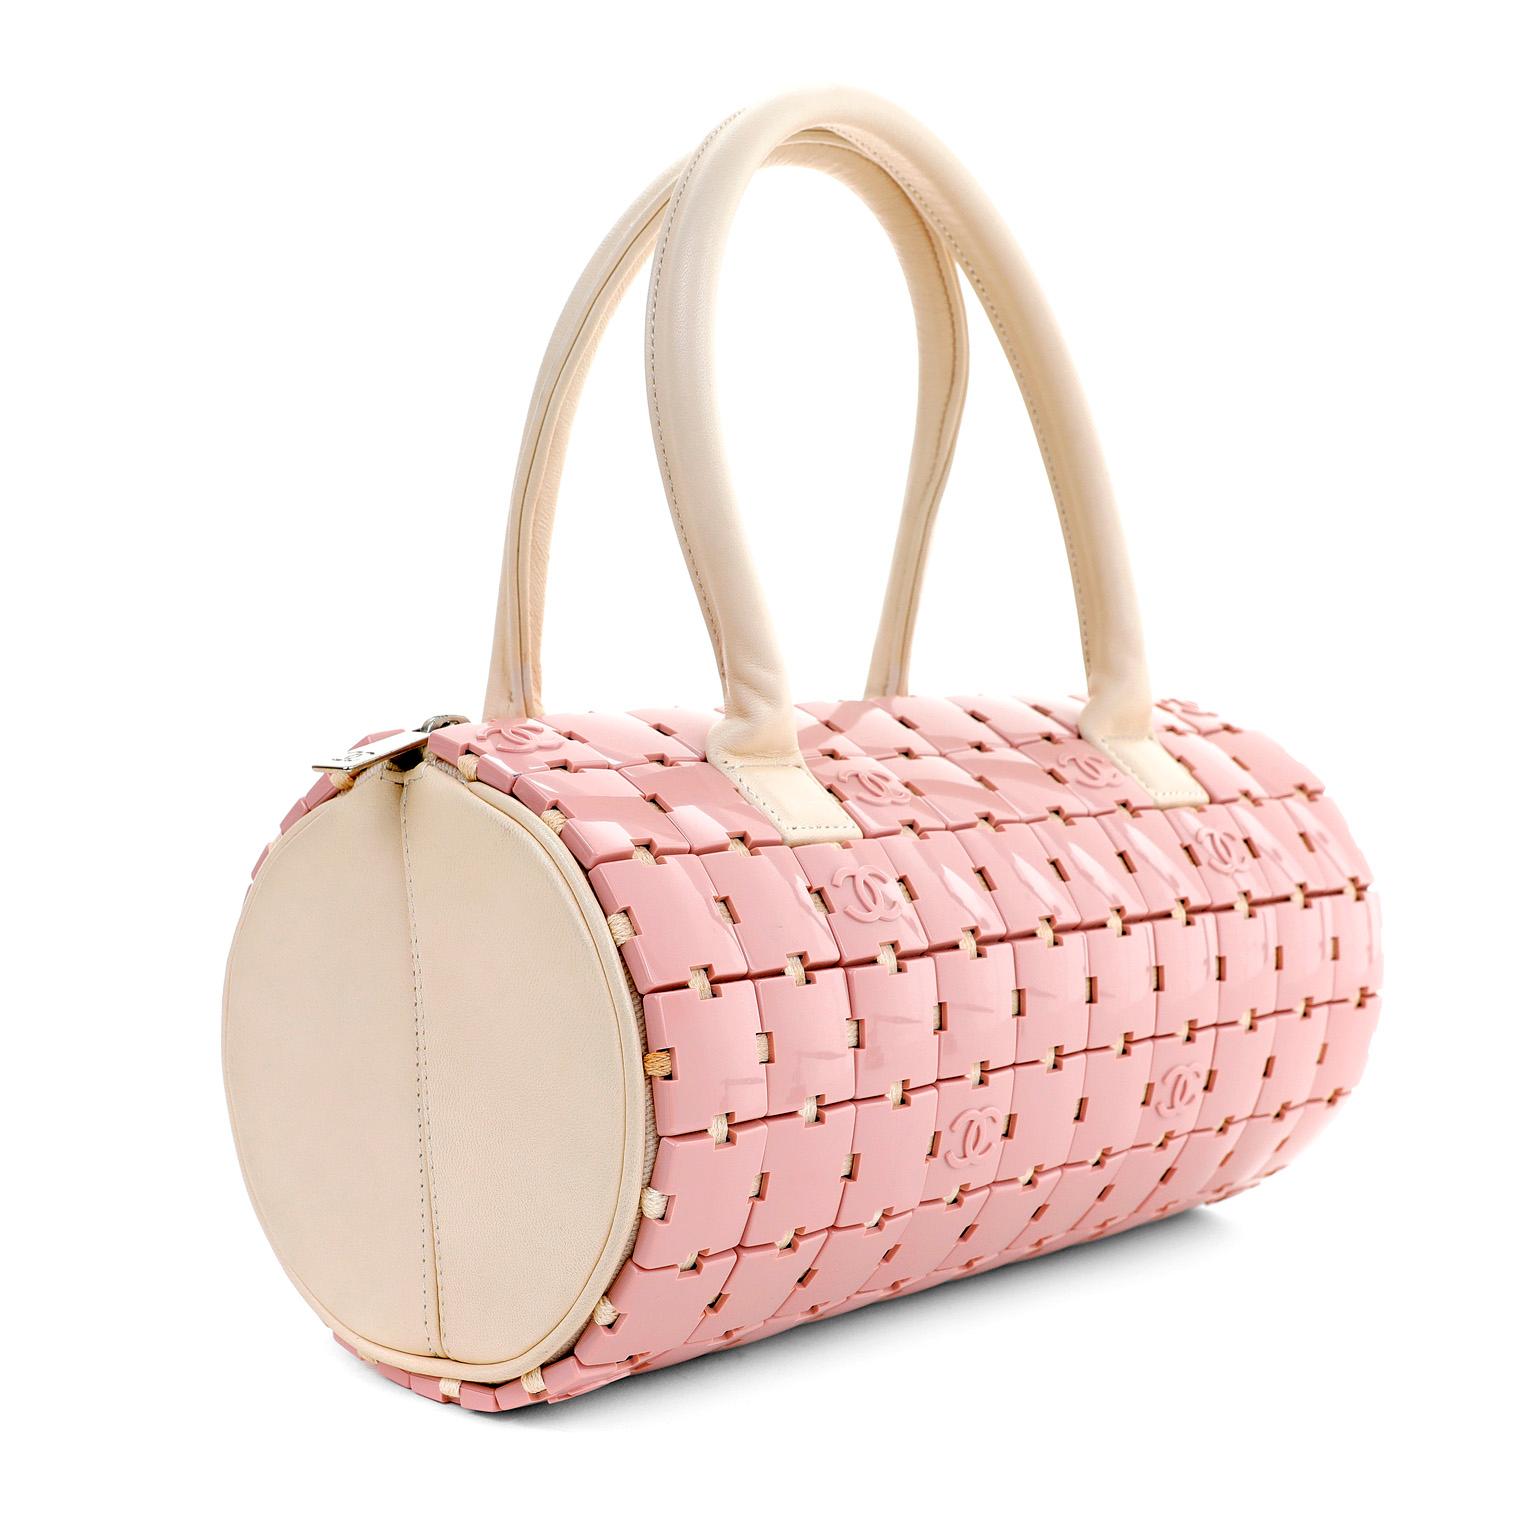 This authentic Chanel Pink Lucite Puzzle Mini Barrel Bag is a rare find in pristine condition.  Light pink Lucite CC logo puzzle pieces cover the exterior of a duffel shaped satchel.  Zippered top accesses the leather interior.  Double beige leather